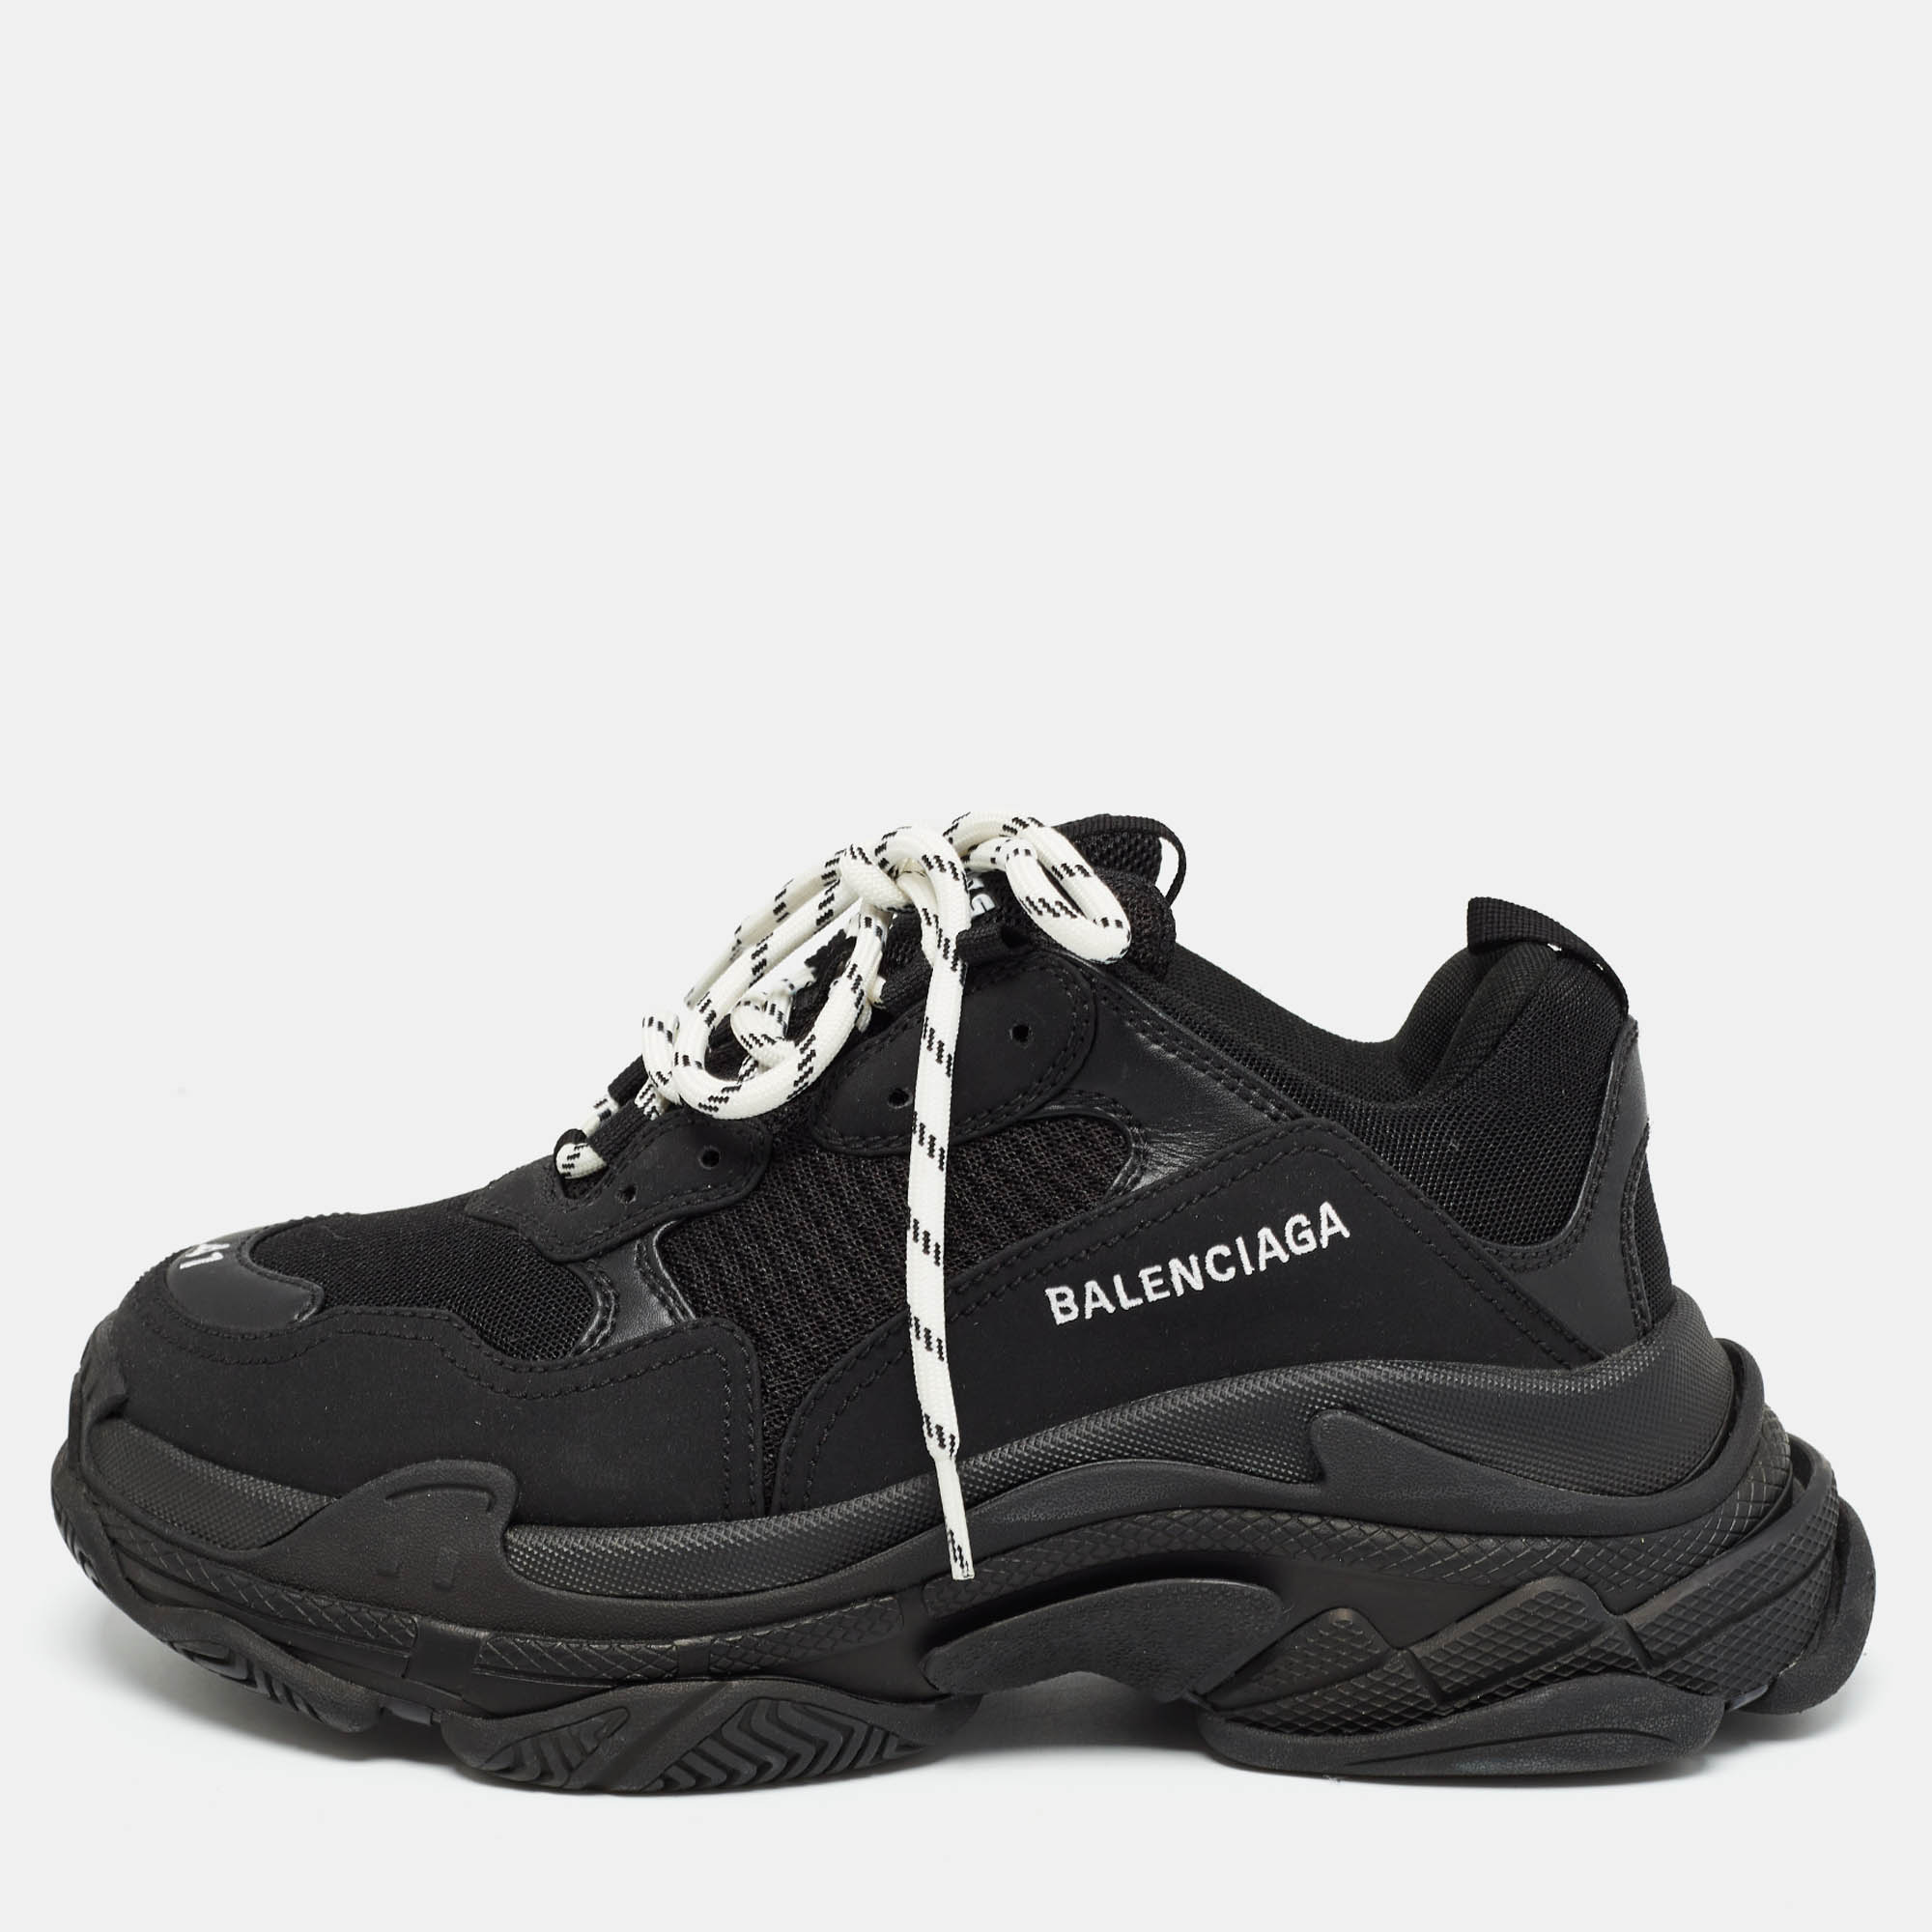 Pre-owned Balenciaga Black Mesh And Faux Leather Triple S Sneakers Size 41